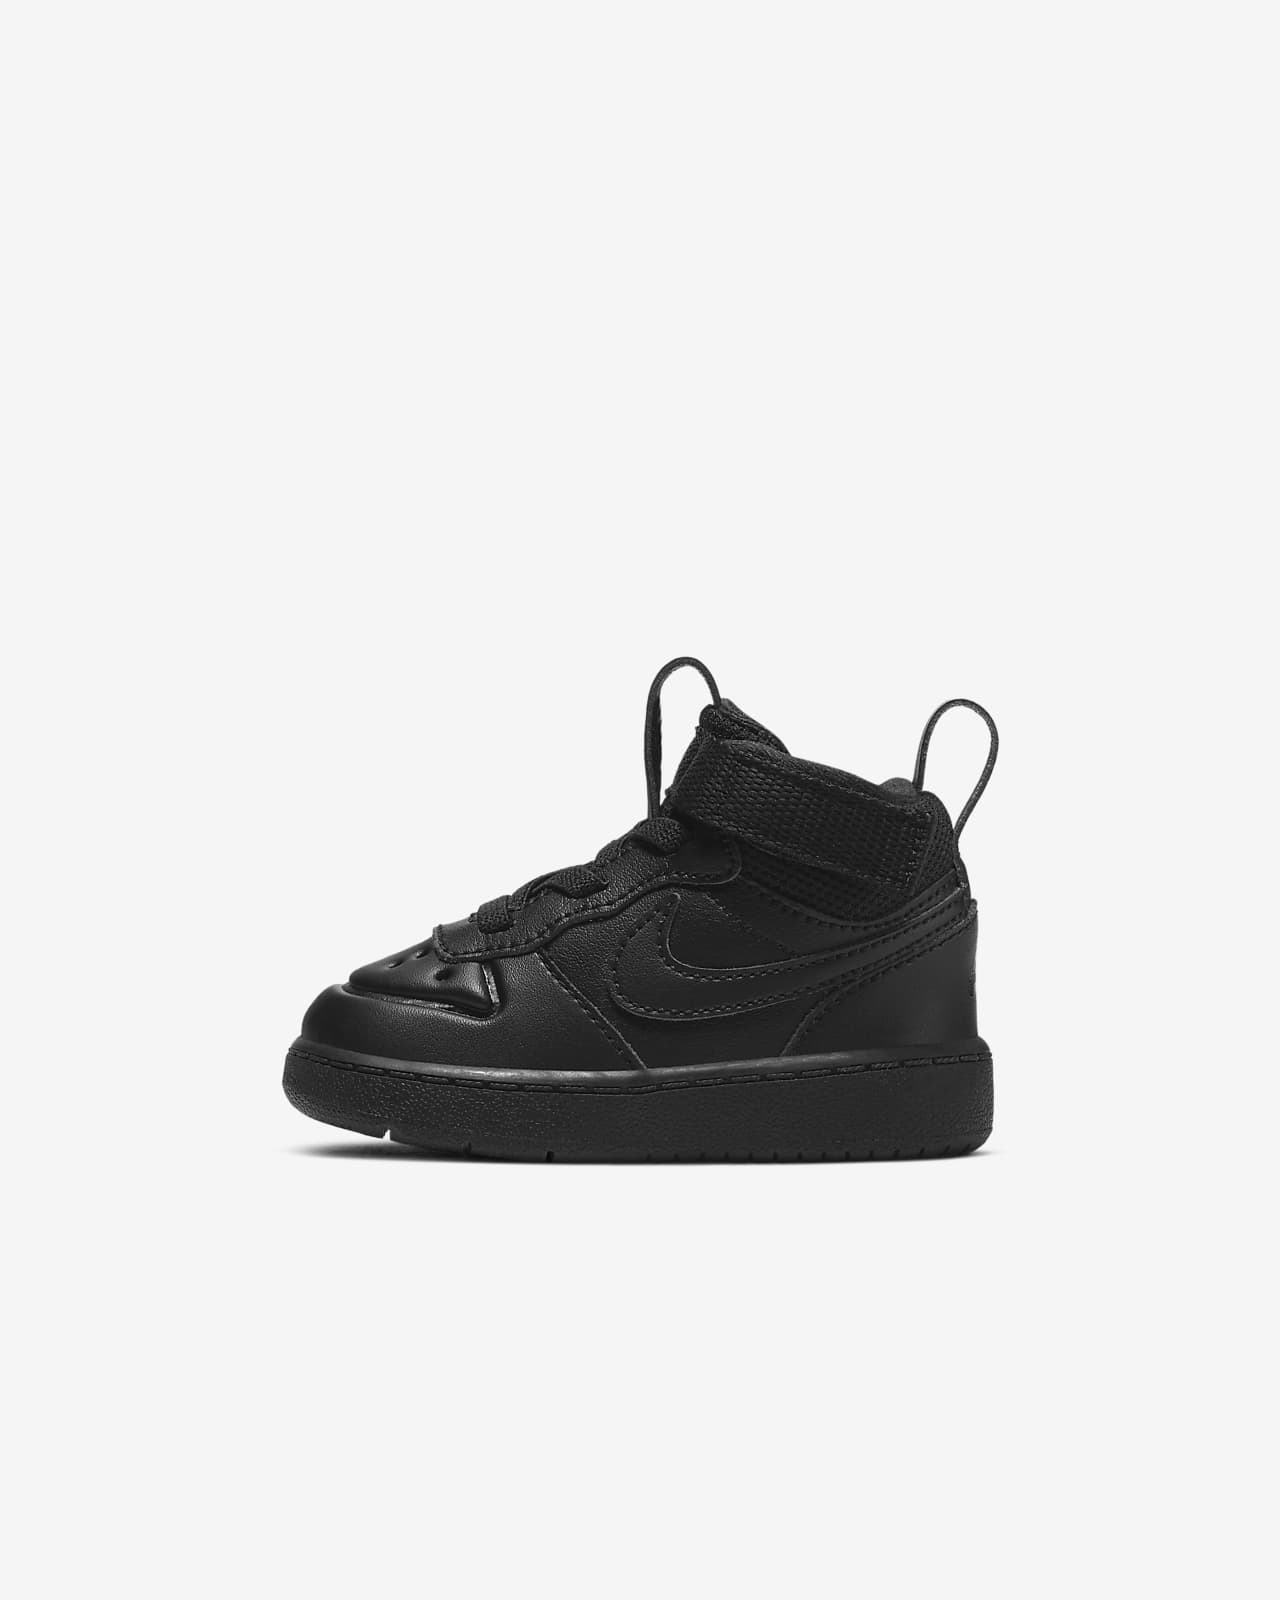 Nike Court Borough Mid 2 Baby and 